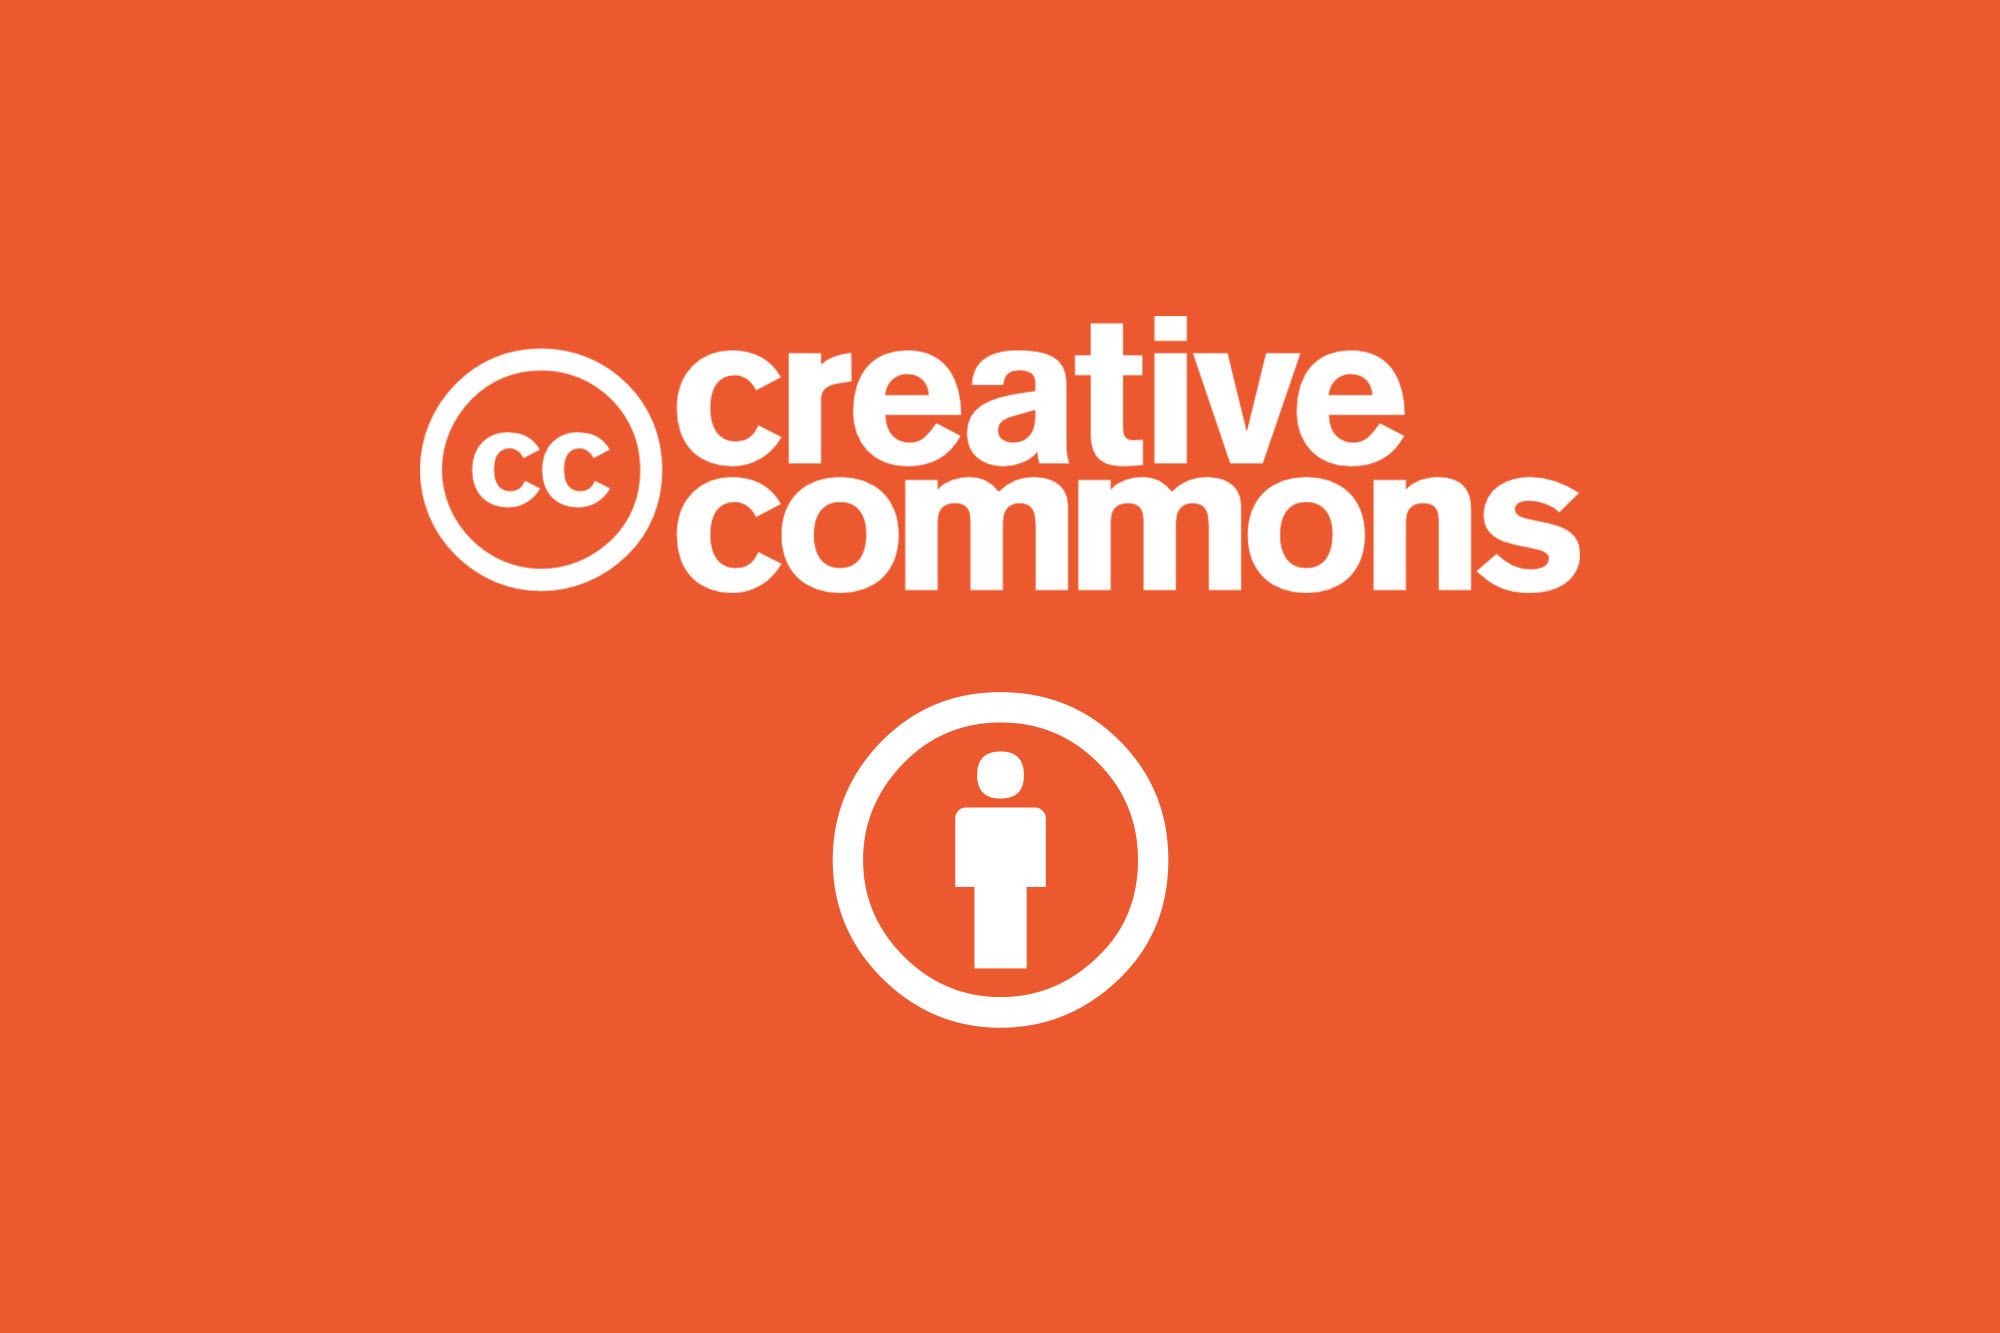 creative commons BY license in white on an orange background